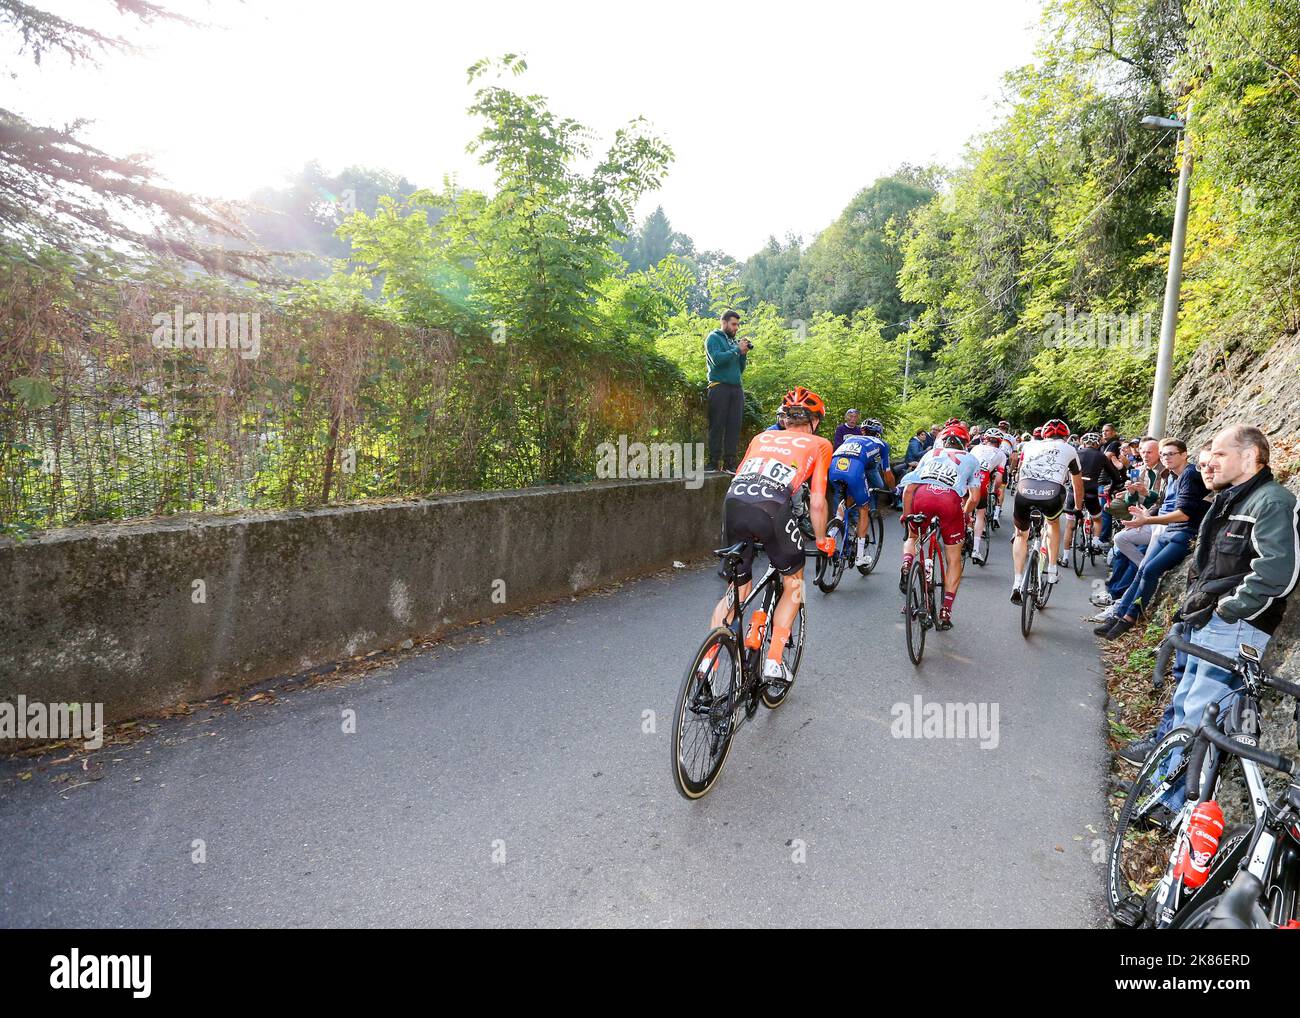 The end of the racers during the Il Lombardia 2019 race in Lombardia, Italy on Saturday October 12, 2019. Stock Photo